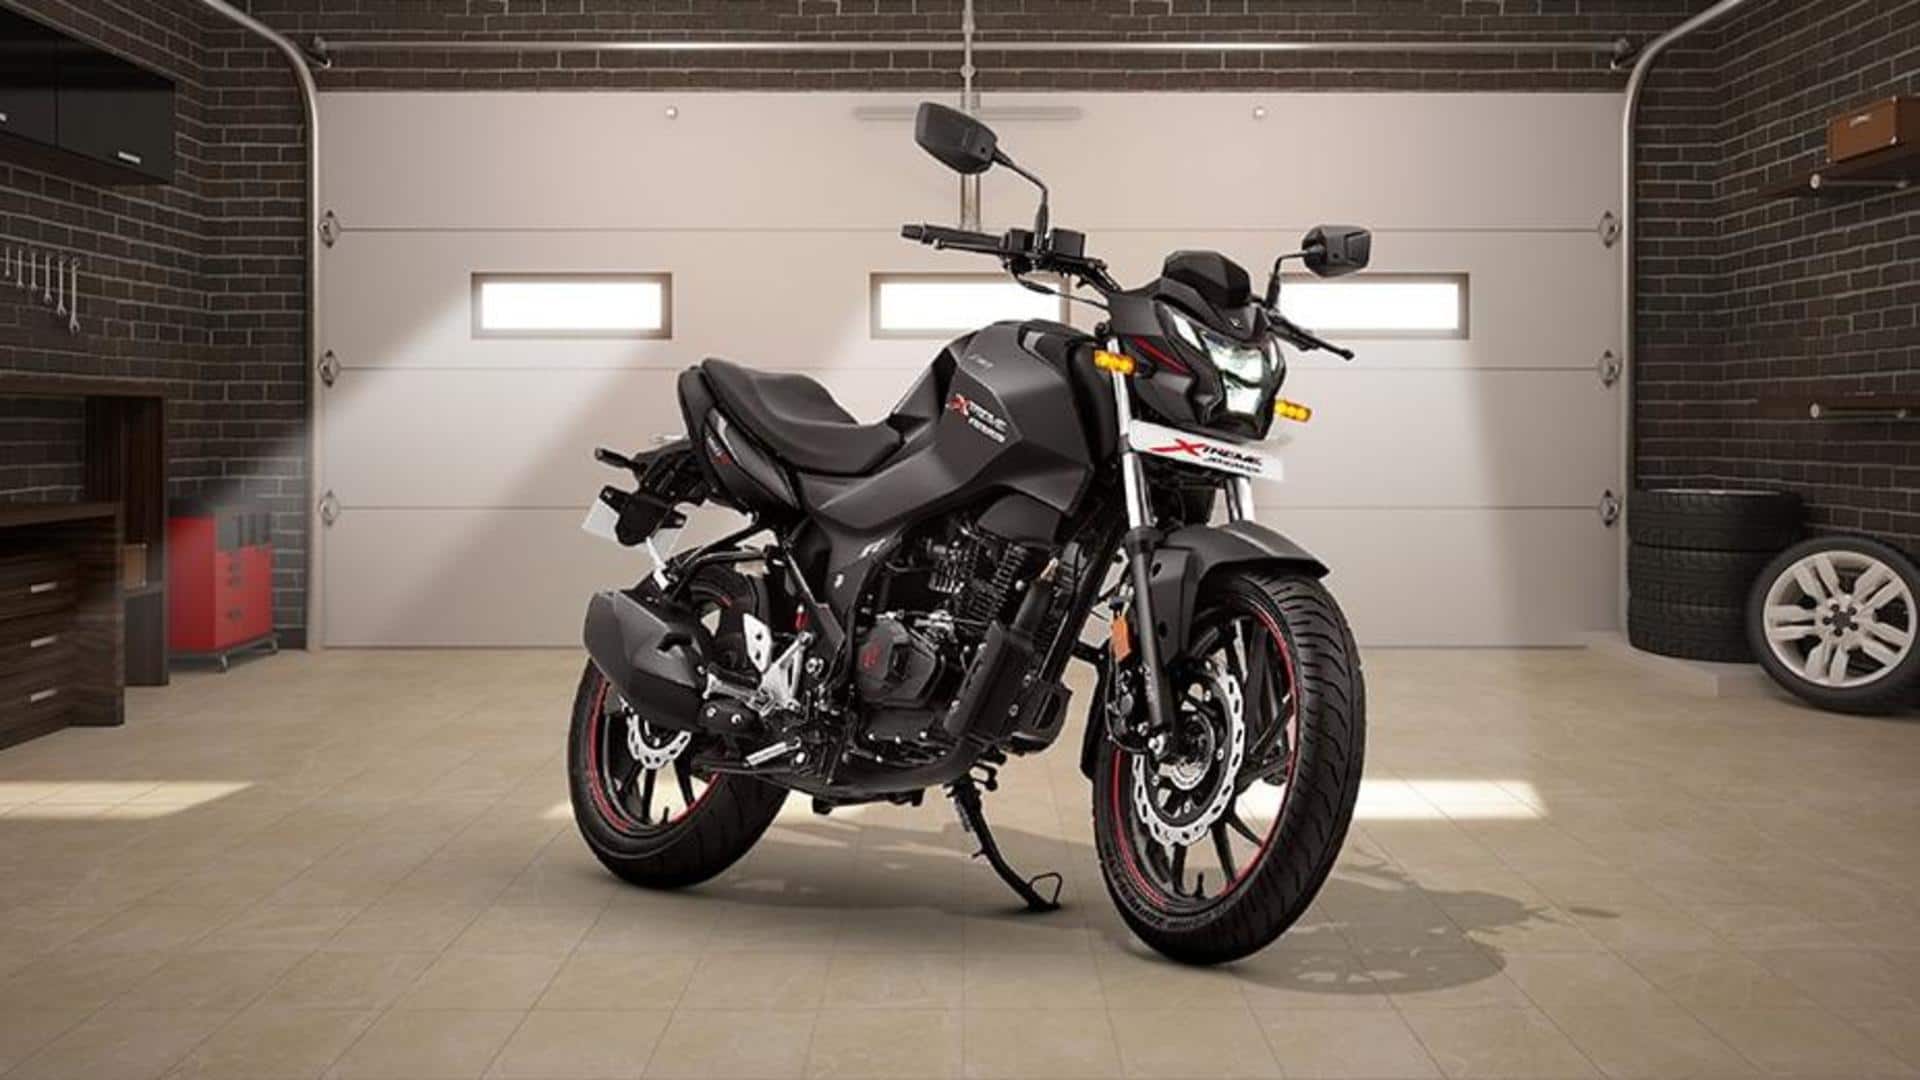 HERO HONDA CBZ XTREME ATFT Photos, Images and Wallpapers, Colours -  MouthShut.com